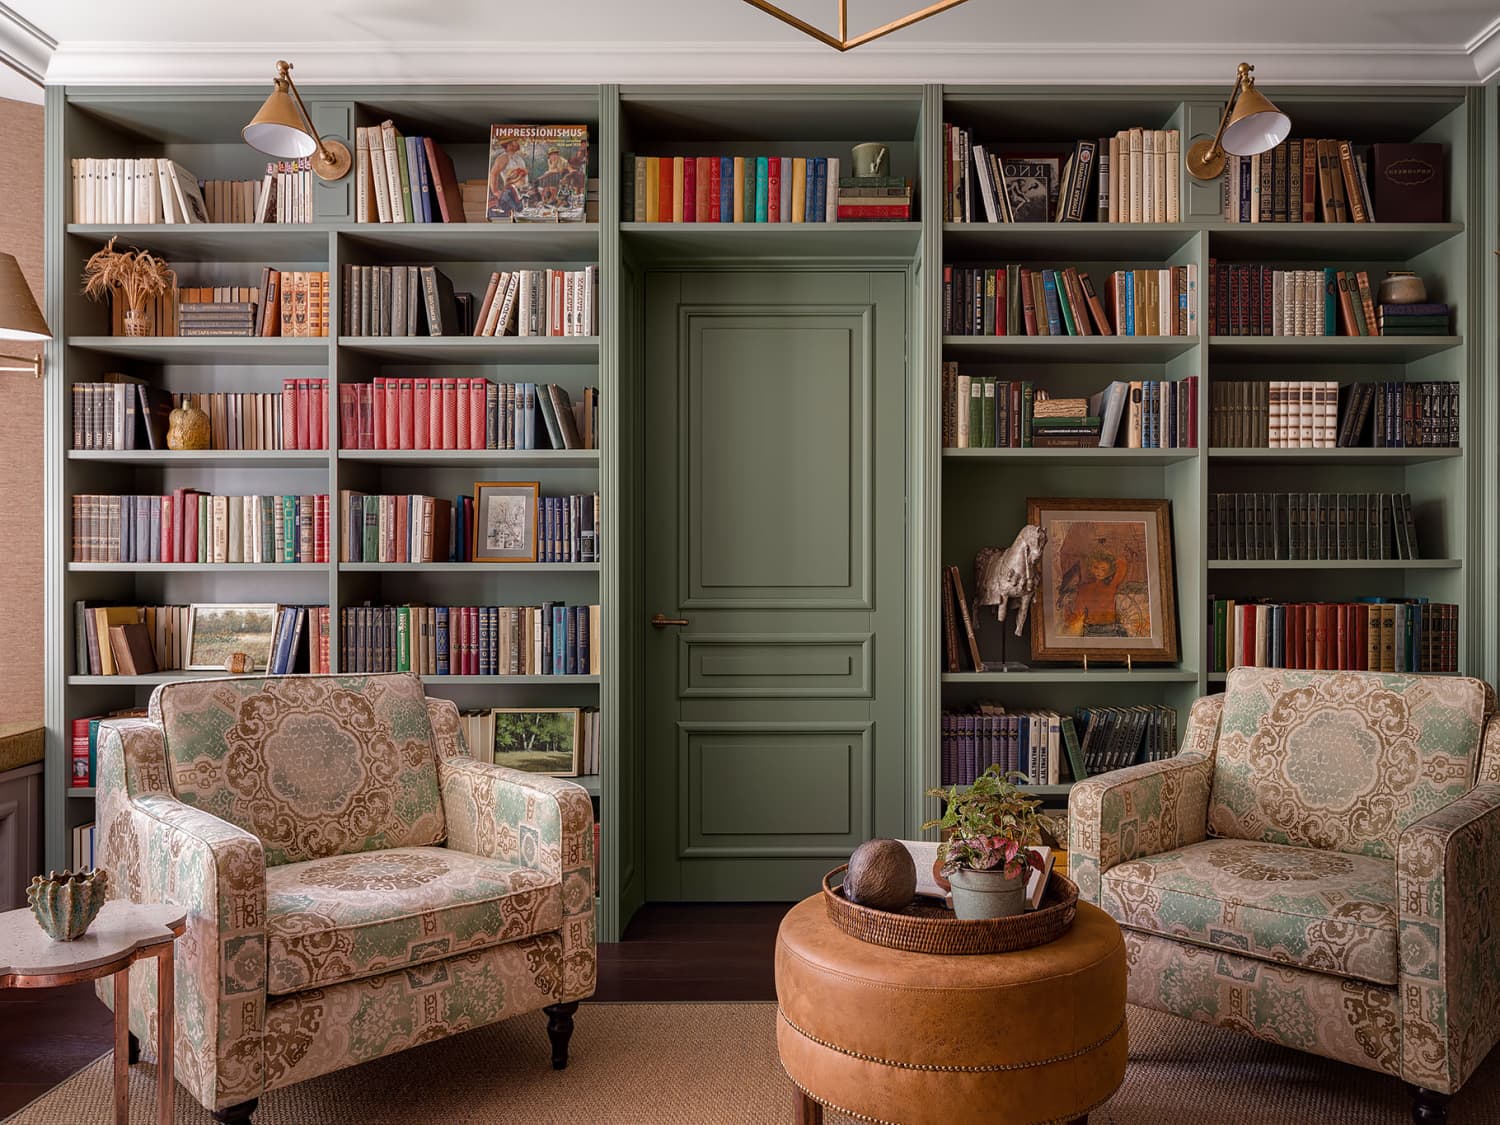 8 Home Library Ideas to Make Your Book Collection a Focal Point